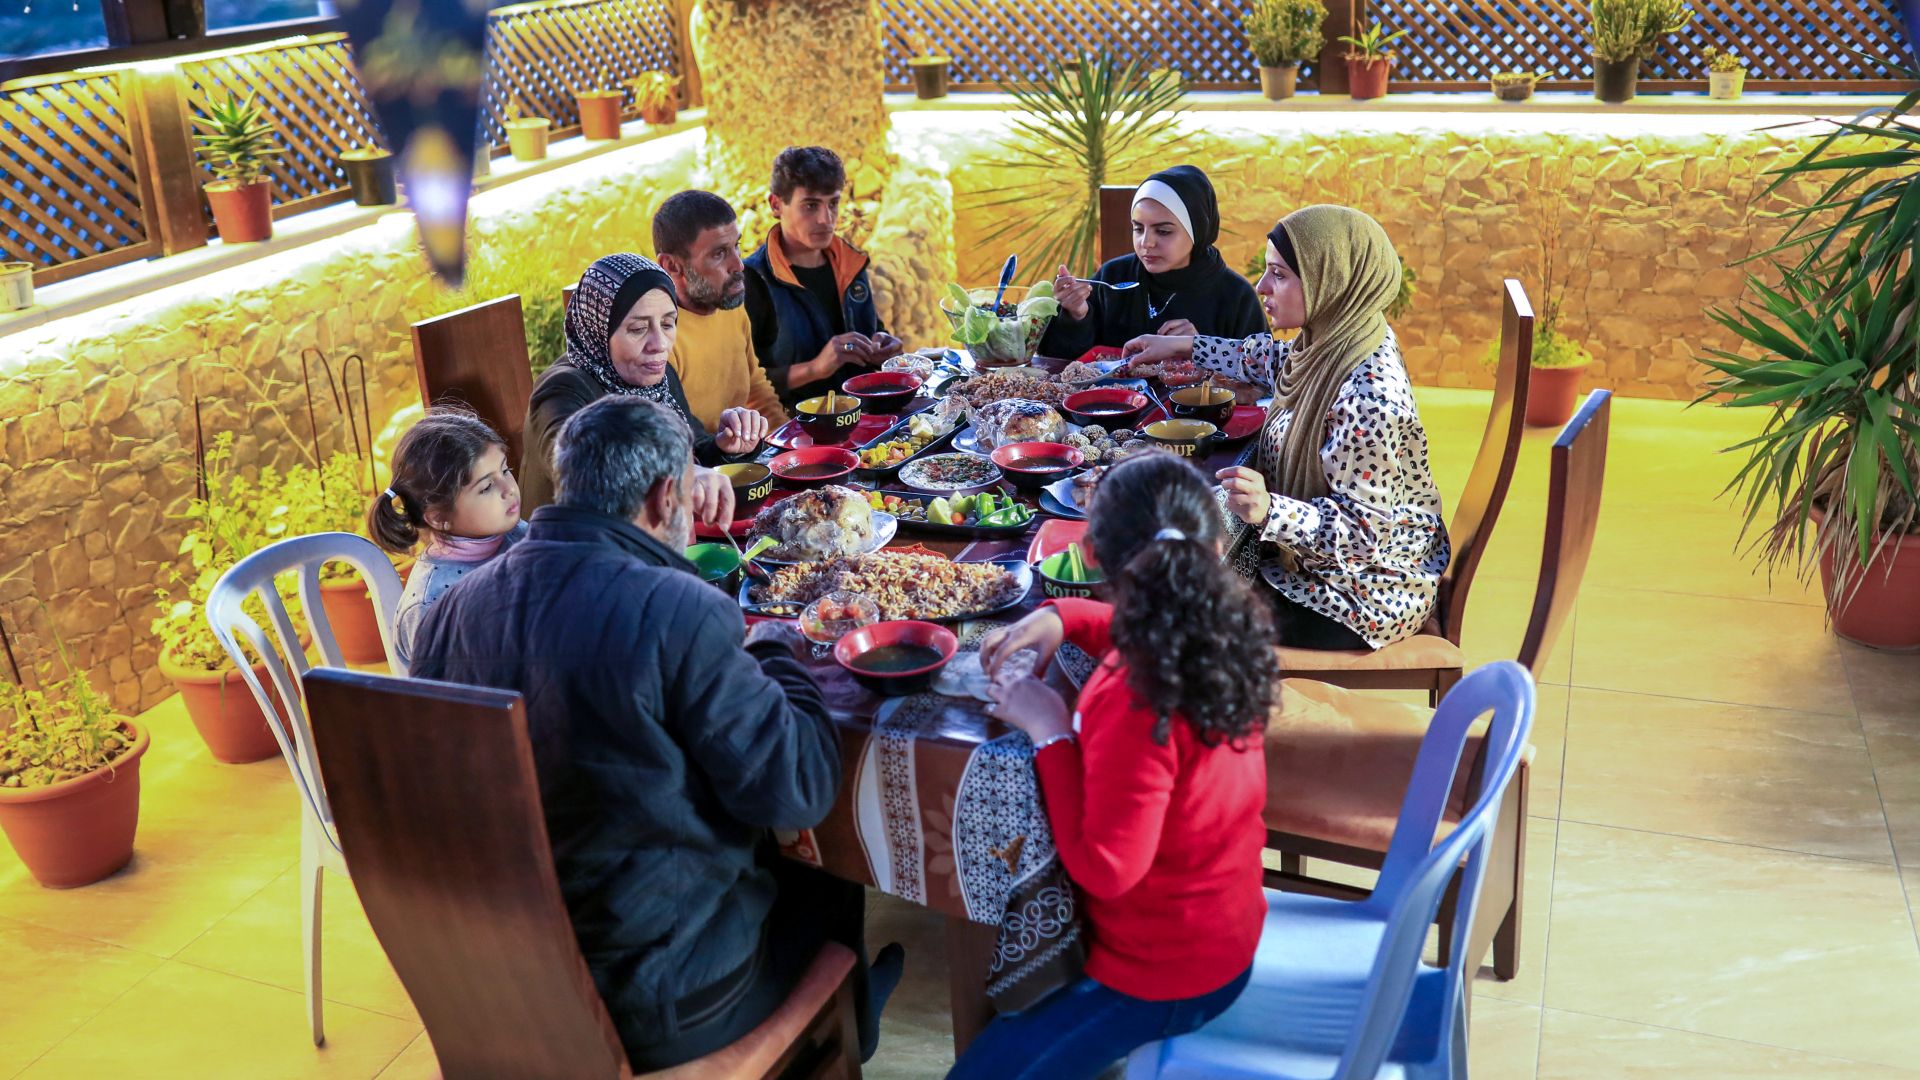 The Shabaan family breaks their fast